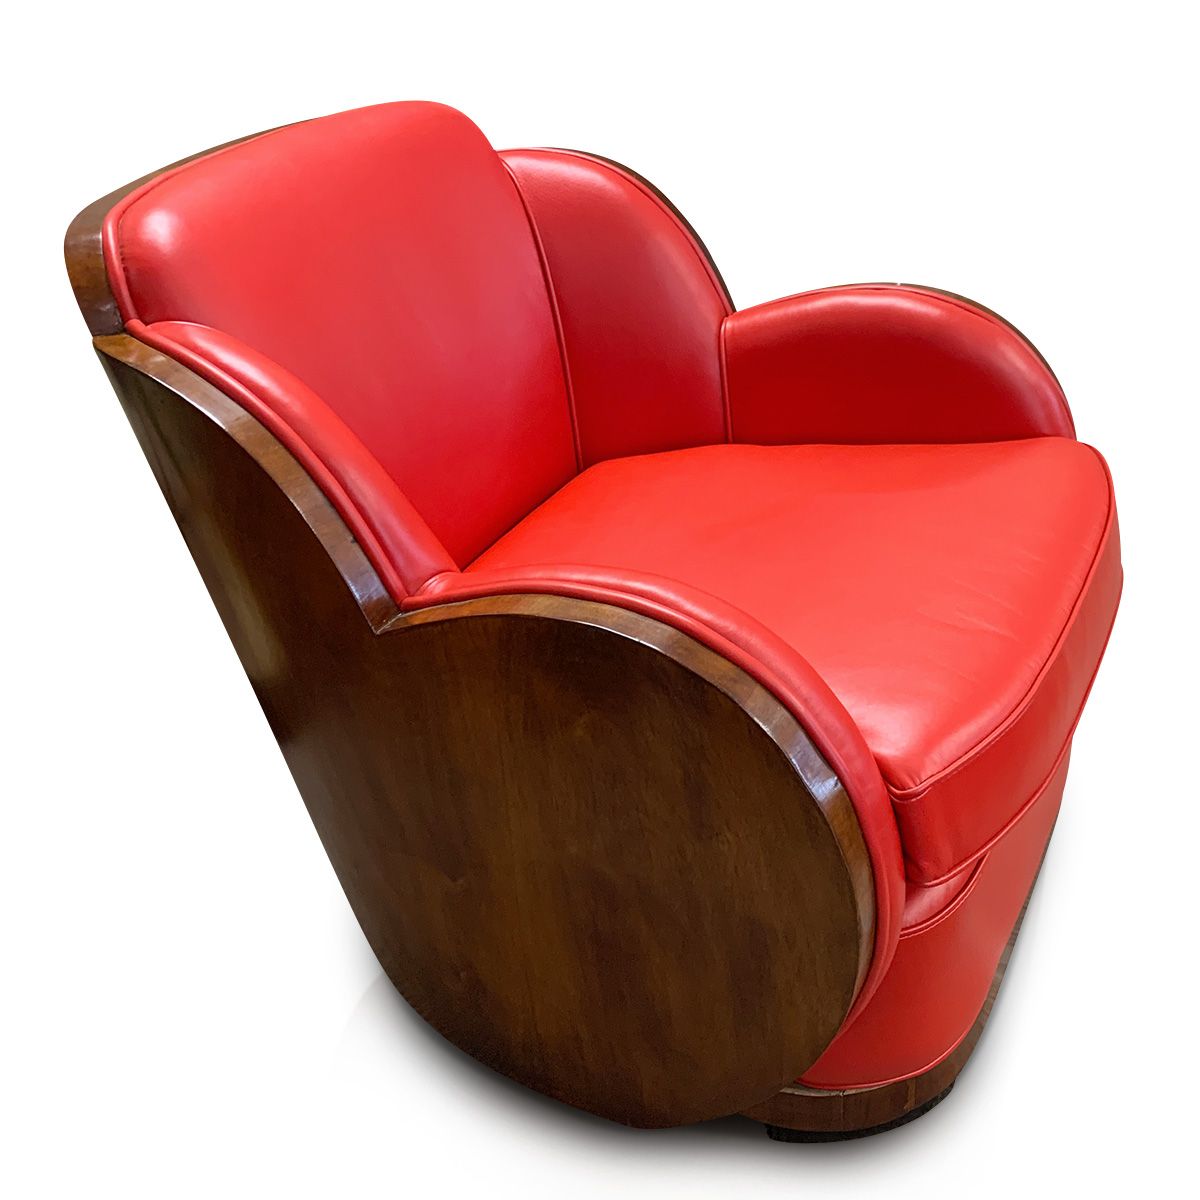 Art Deco Chairs And Sofas - Thedesigngallery